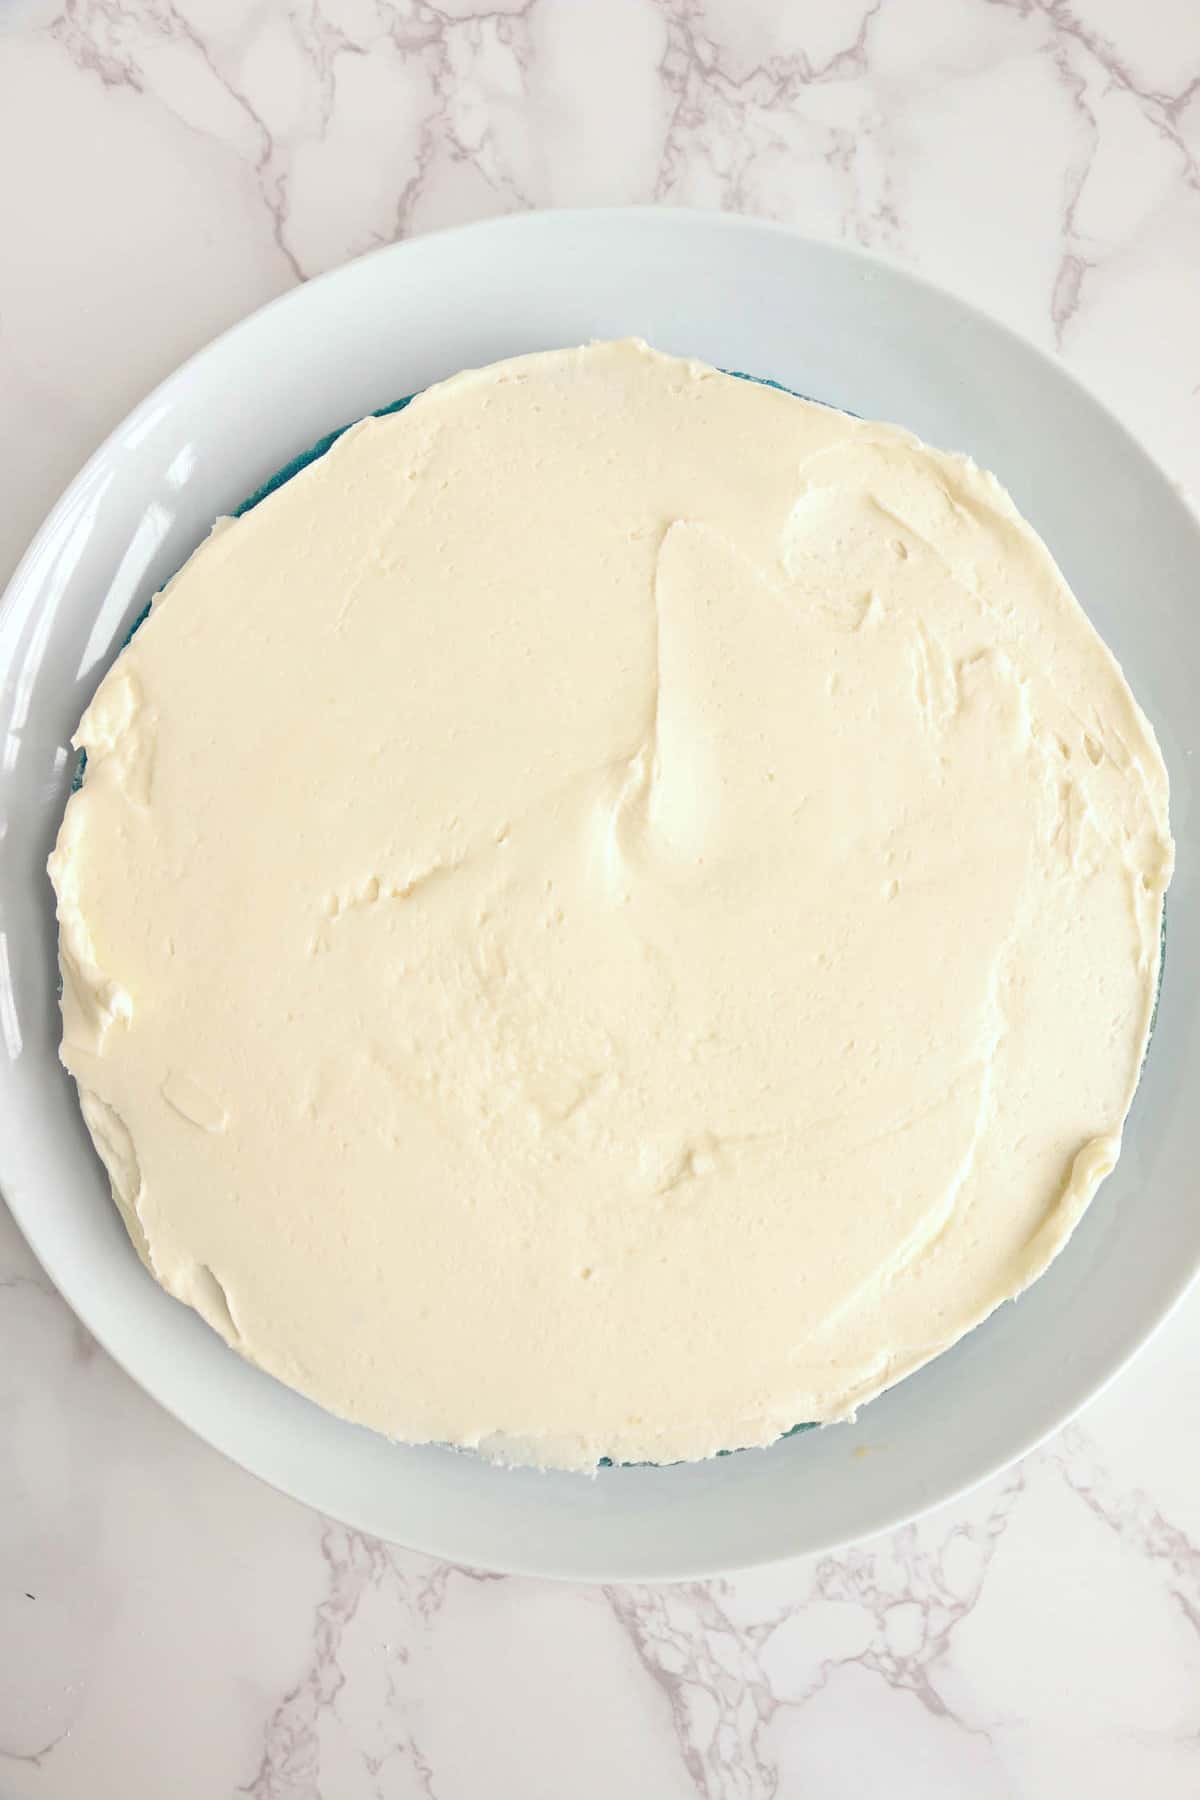 Add frosting to each layer of cake.